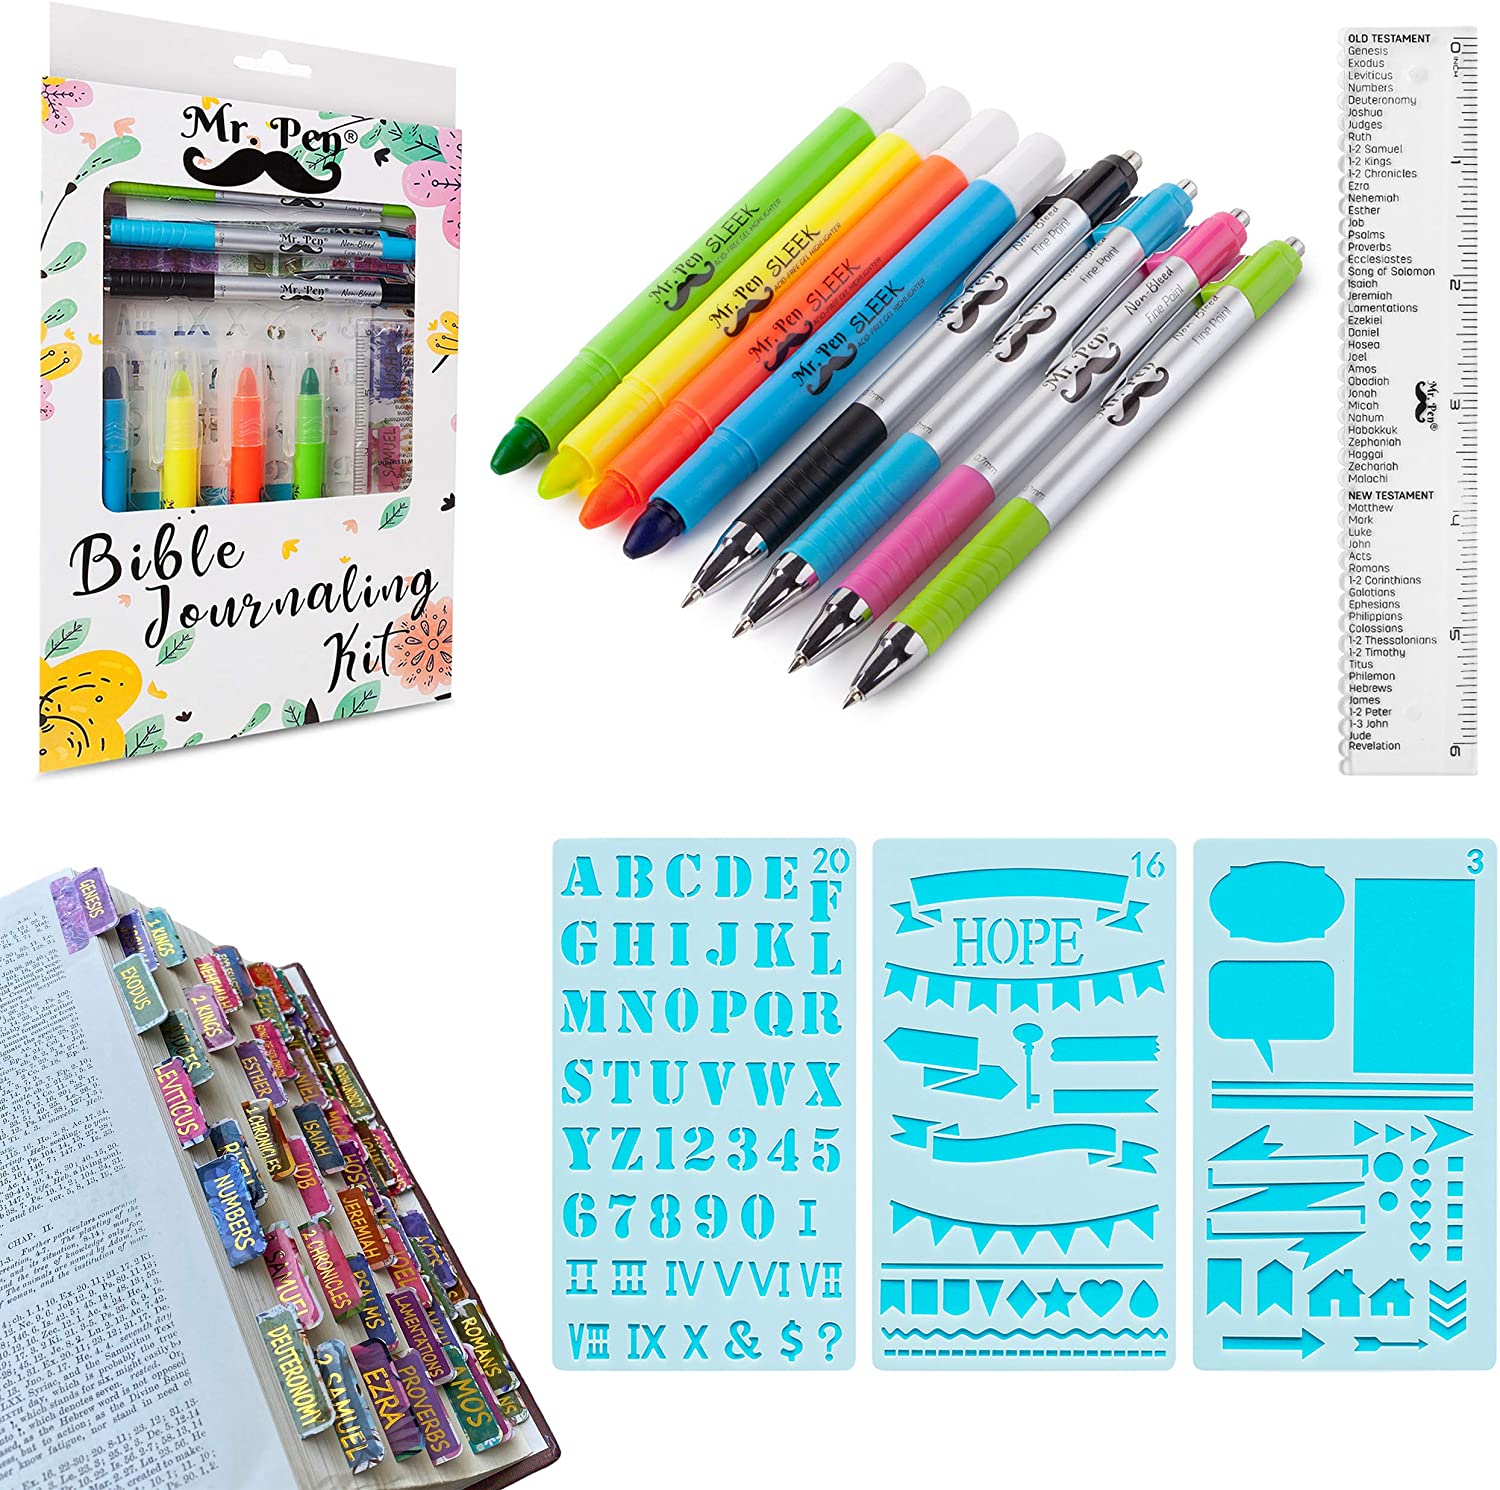 Mr. Pen- Bible Journaling Kit with Bible Highlighters and Pens No